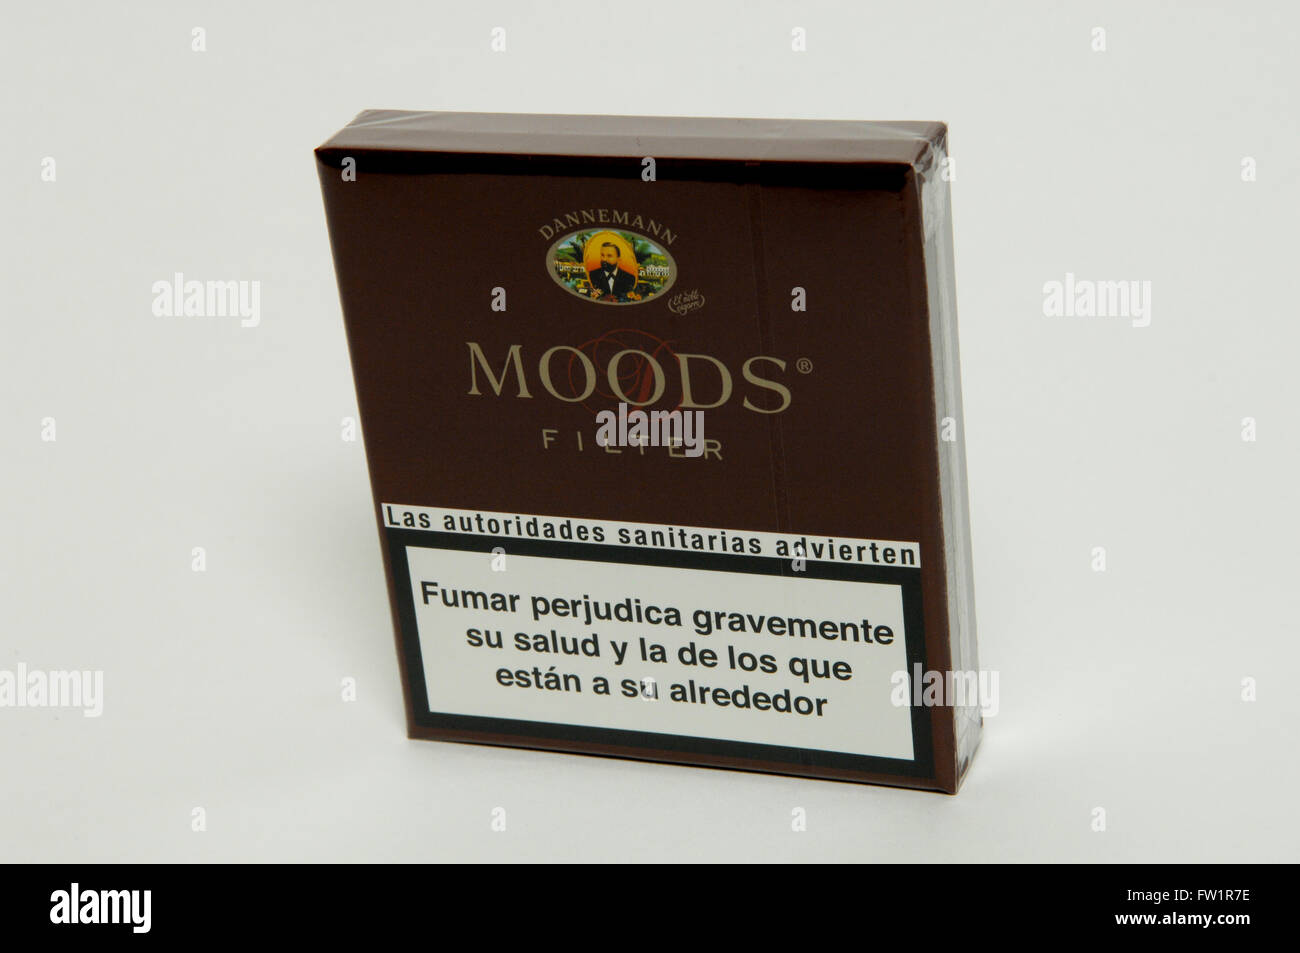 Moods Filter Cigars Stock Photo